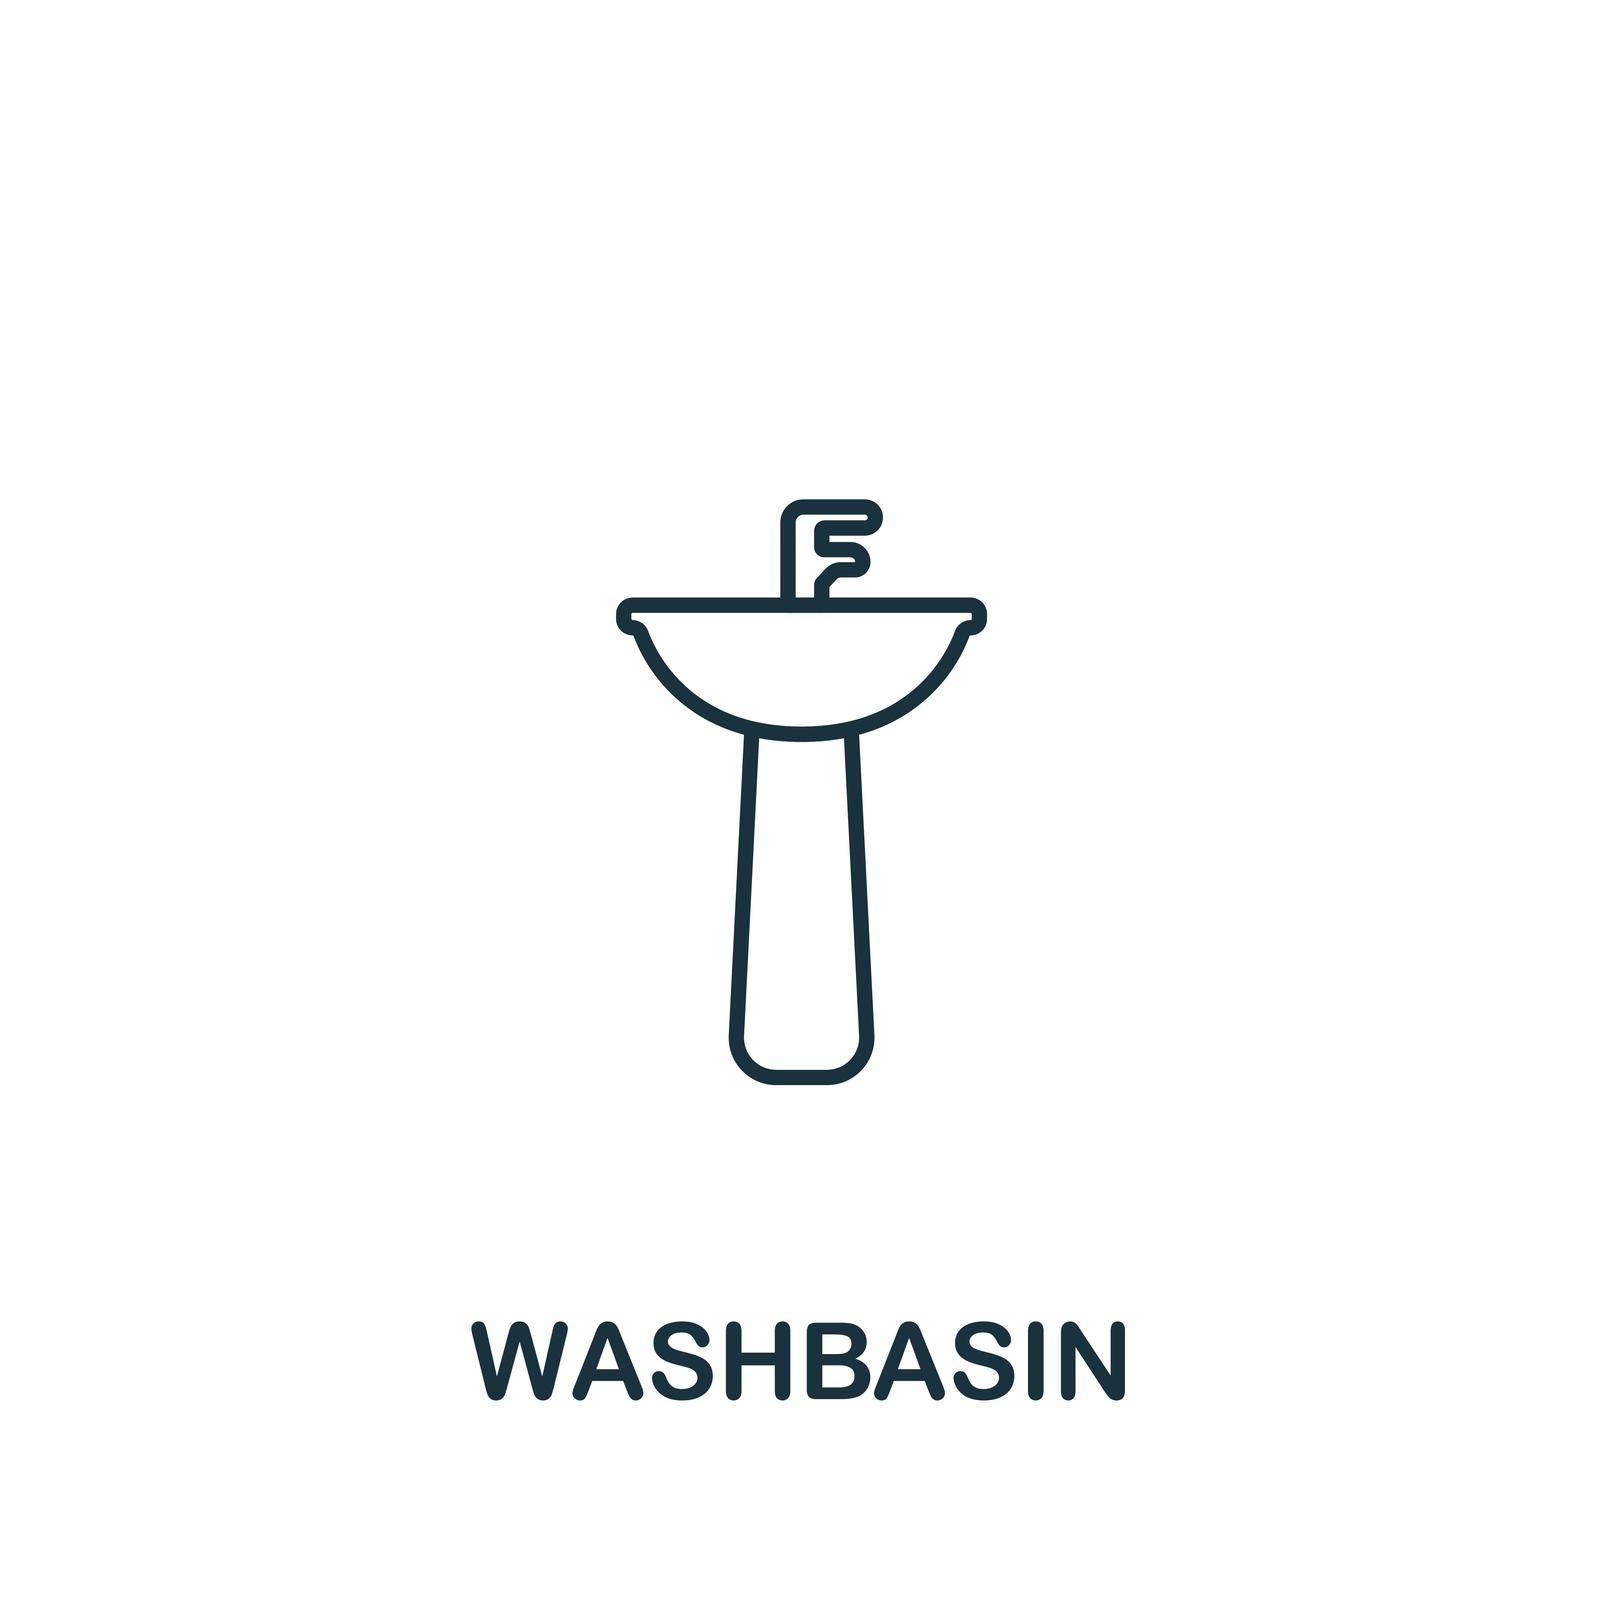 Washbasin icon. Line simple Washbasin icon for templates, web design and infographics by simakovavector